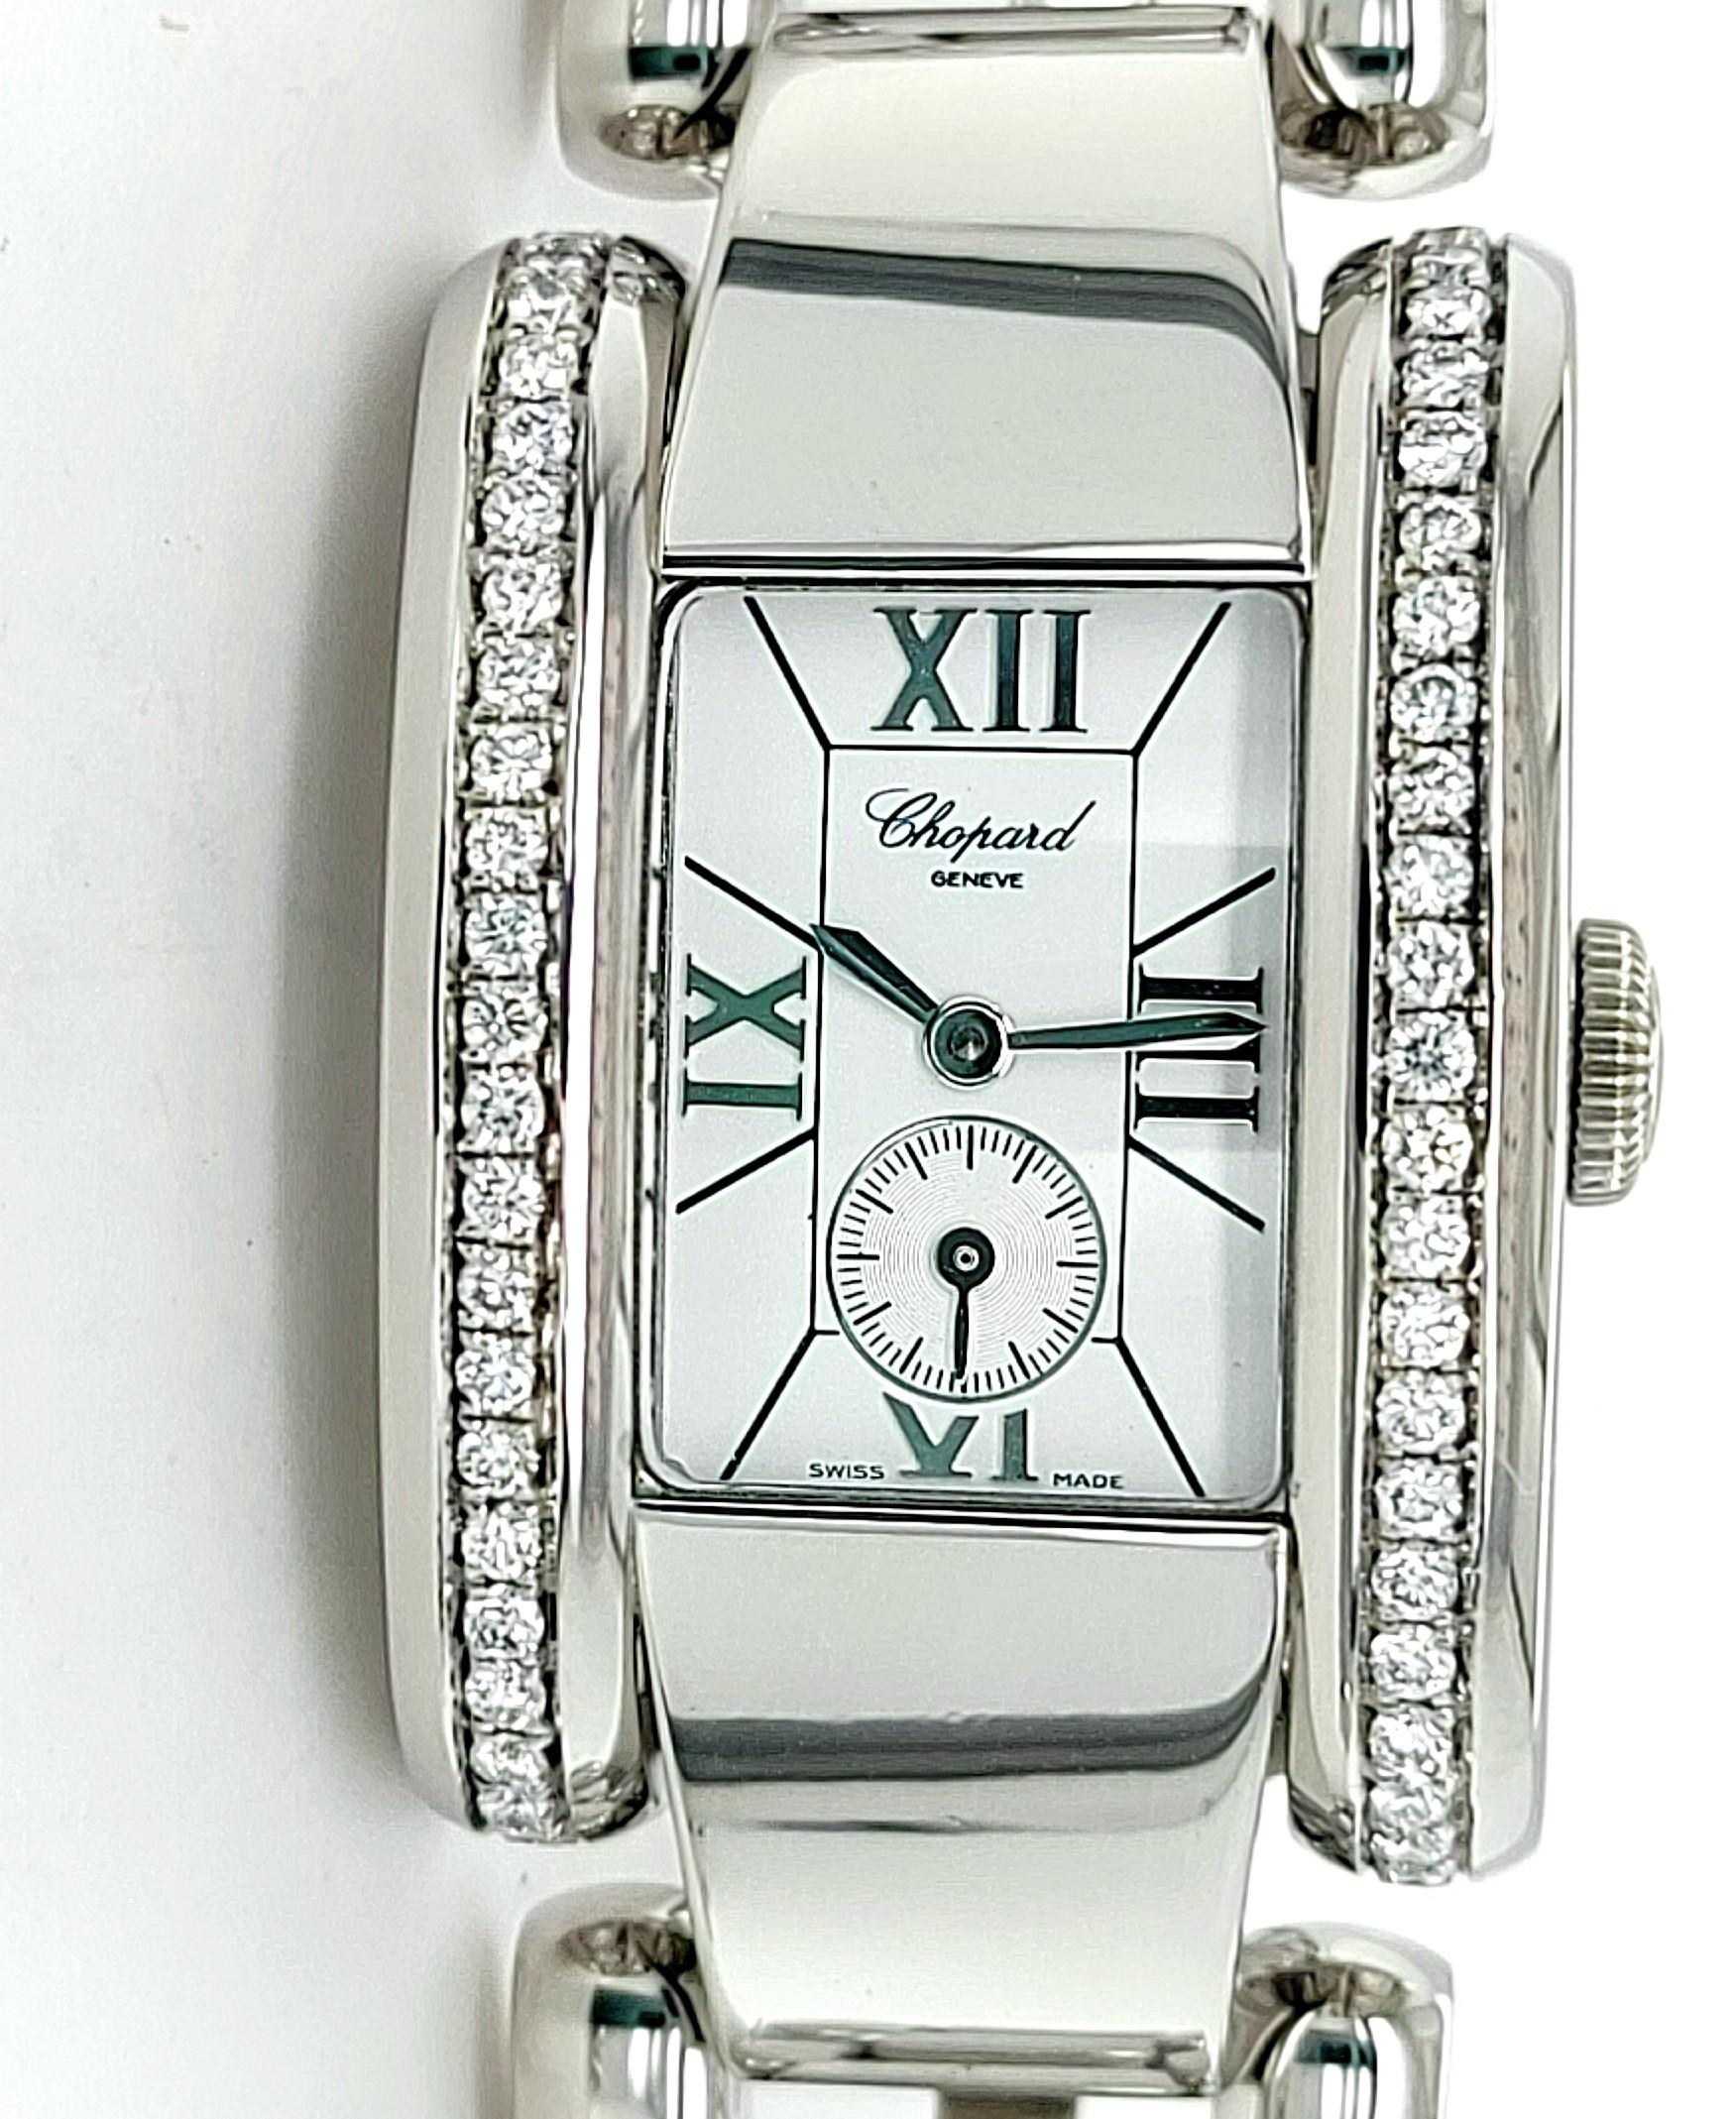 Chopard La Strada Ladies in Steel with Partial Diamond on Bezel, 24 mm

Model: Chopard La strada

Reference number: 8357

Movement: Quartz

Functions: Hours, Minutes, Small seconds

Case: Rectangle,  Stainless steel, measurements case length 24 mm x